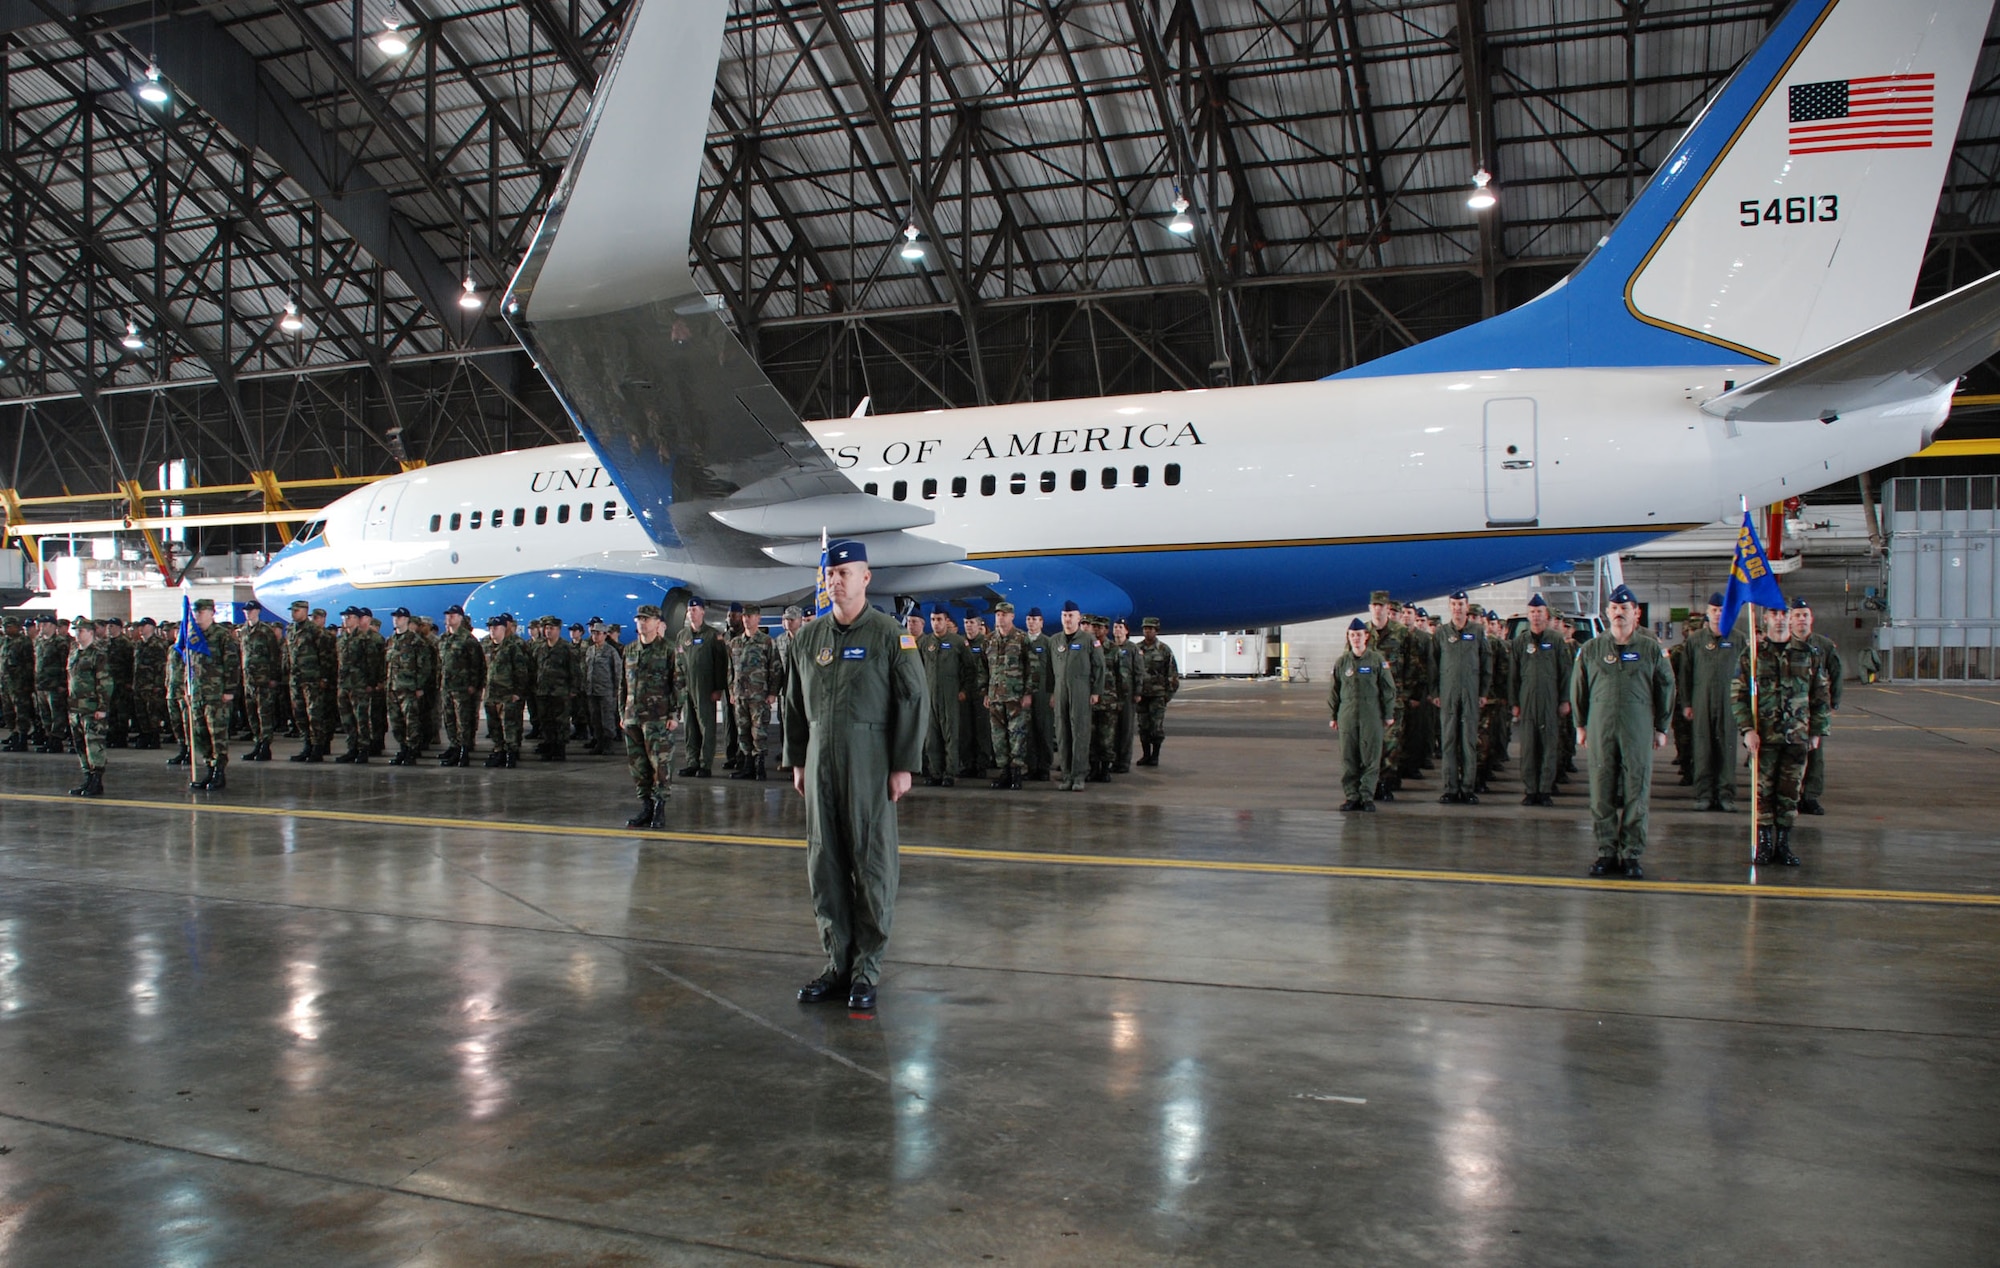 932nd Airlift Wing members stand before a 2007 model C-40C aircraft as they welcome Col. John (Jay) C. Flournoy, Jr. to Illinois.  


He comes in to lead the 932nd from 22nd Air Force at Dobbins Air Reserve Base, Ga., where he served as director of 22nd Air Force Operations. Twenty-Second Air Force is the largest of three numbered air forces in the Air Force Reserve, and manages more than 25,000 reservists. 

The mission of the 1,000 member 932nd AW is to provide first-class, worldwide, safe, and reliable airlift for distinguished visitors and their staffs on the wing's C-9C and C-40 aircraft for VIP special assignment missions. The wing reports to 4th Air Force at March Air Reserve Base, Calif. Officiating at the ceremony was Maj. Gen. Robert E. Duignan, commander of Air Force Reserve Command's 4th Air Force. 

"Maryanne (Colonel Miller) has done a wonderful job with this mission bringing us out of the past and into the future with this airplane," said General Duignan. "This mission is vitally important to this nation. This is a new mission for the reserves, and she jumped in with both feet." 

About Colonel Flournoy, General Duignan said, "He's had a great career. He comes to you at the 932nd as a very experienced aviator and somebody that understands the mission. I know he'll do a great job." 

Colonel Flournoy's arrival at Scott AFB is a homecoming of sorts. His father was assigned to the southern Illinois base three times. 

"When asked where I'm from, I tell people I was born in Alabama, but I consider Scott AFB my home town," said Colonel Flournoy. 

Throughout those assignments, he attended Scott AFB elementary schools and Mascoutah High School in Mascoutah, Ill., for much of his early life. He graduated from Southern Illinois University at Edwardsville, Ill., where he also graduated from the Reserve Officer Training Corps. He entered the Air Force in 1986. 

While on active duty, he served as a B-52 pilot and as a T-37 instructor pilot. He 